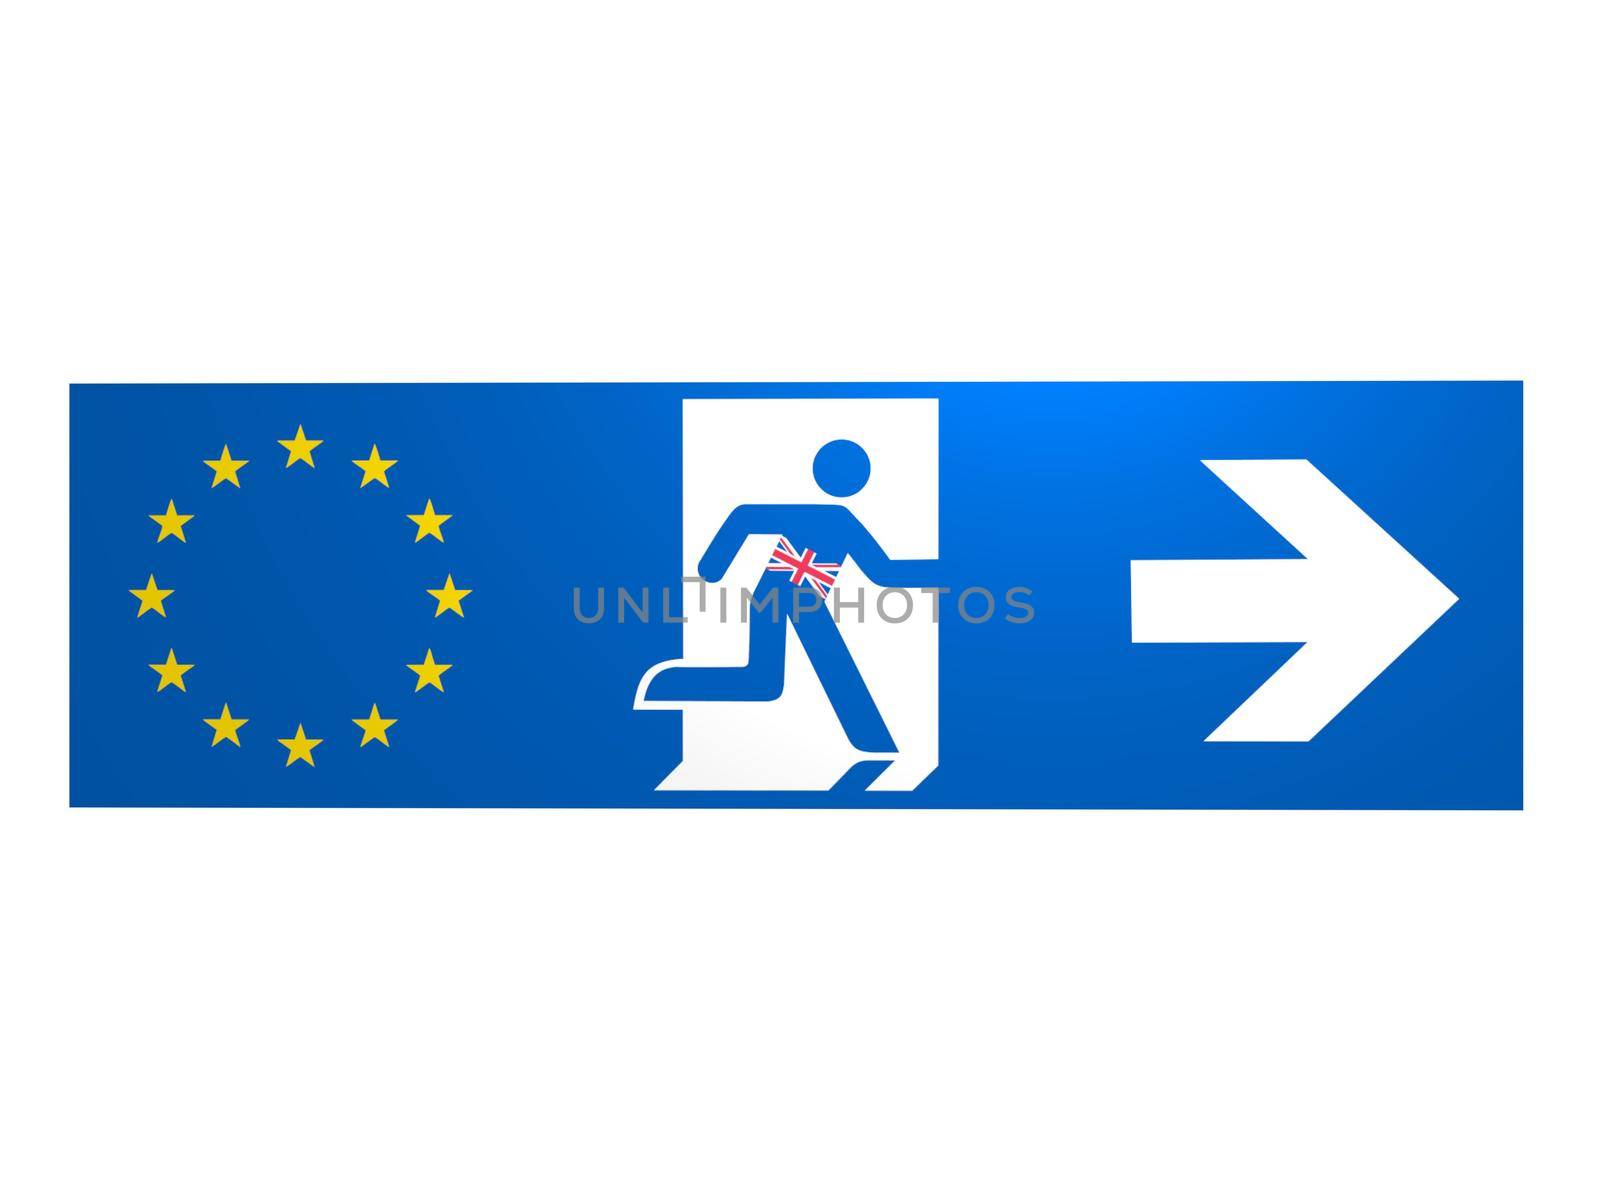 brexit europe logo on white background - 3d rendering by mariephotos